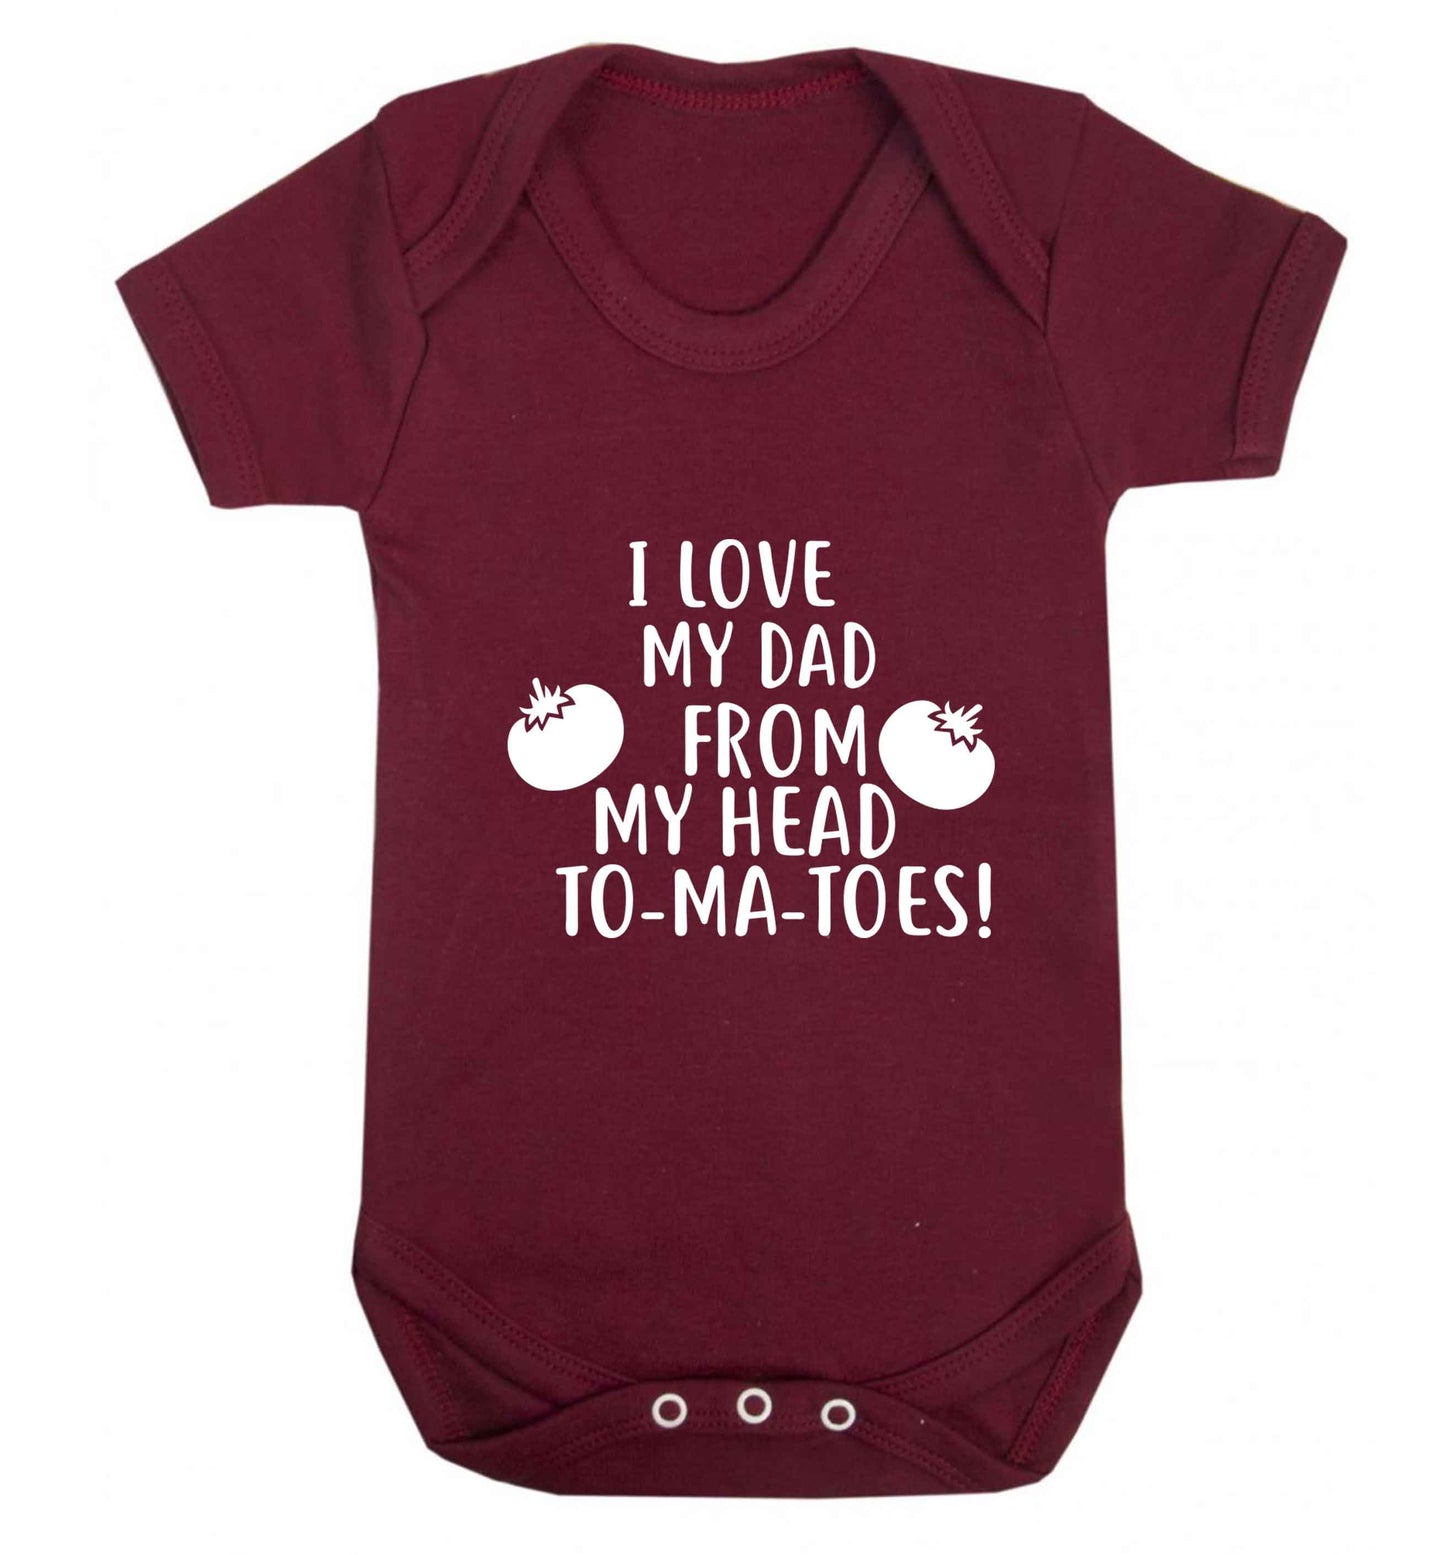 I love my dad from my head to-ma-toes baby vest maroon 18-24 months